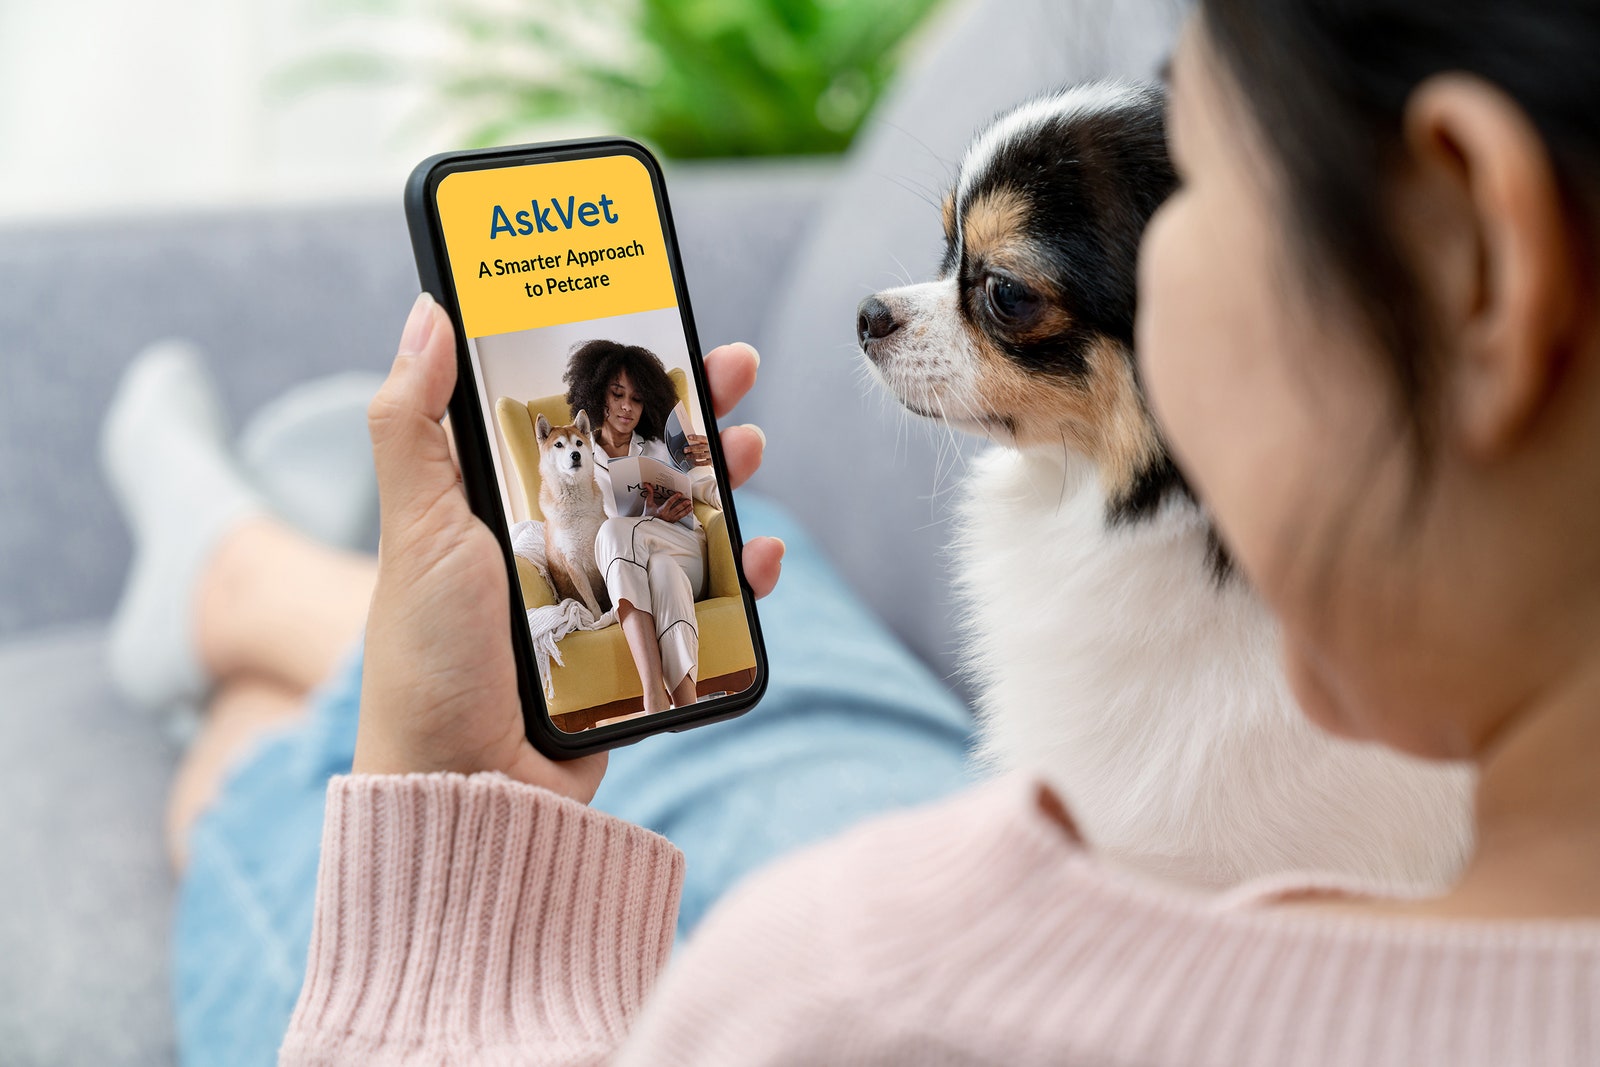 women with dog looking at Ask Vet app on mobile phone